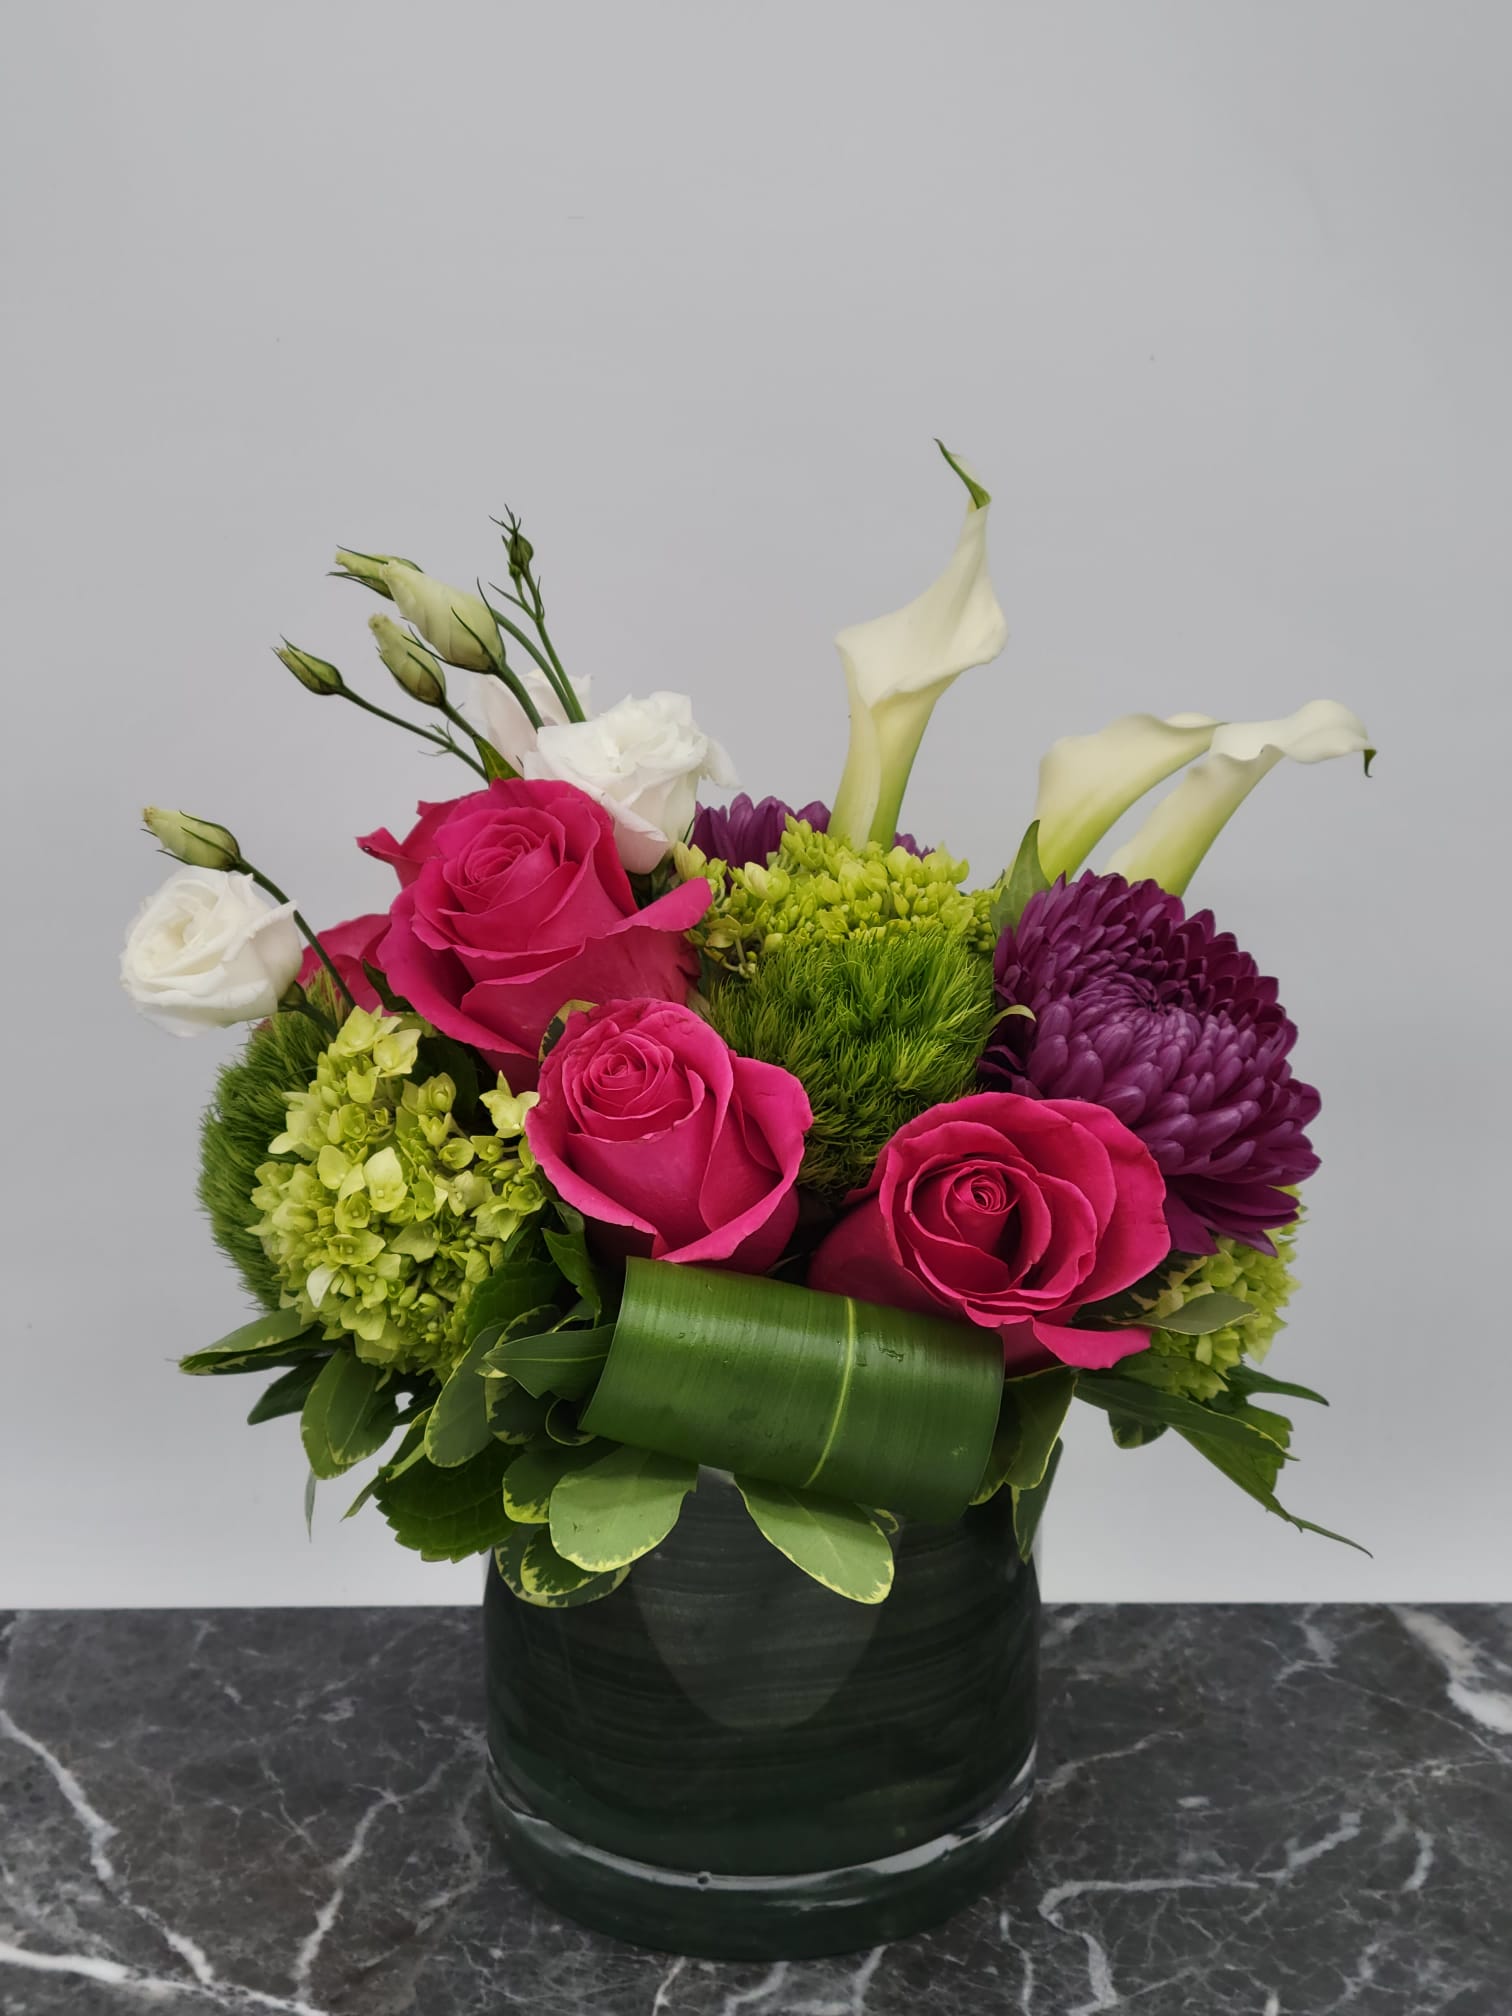 Weekly Shabbos Flower Subscription